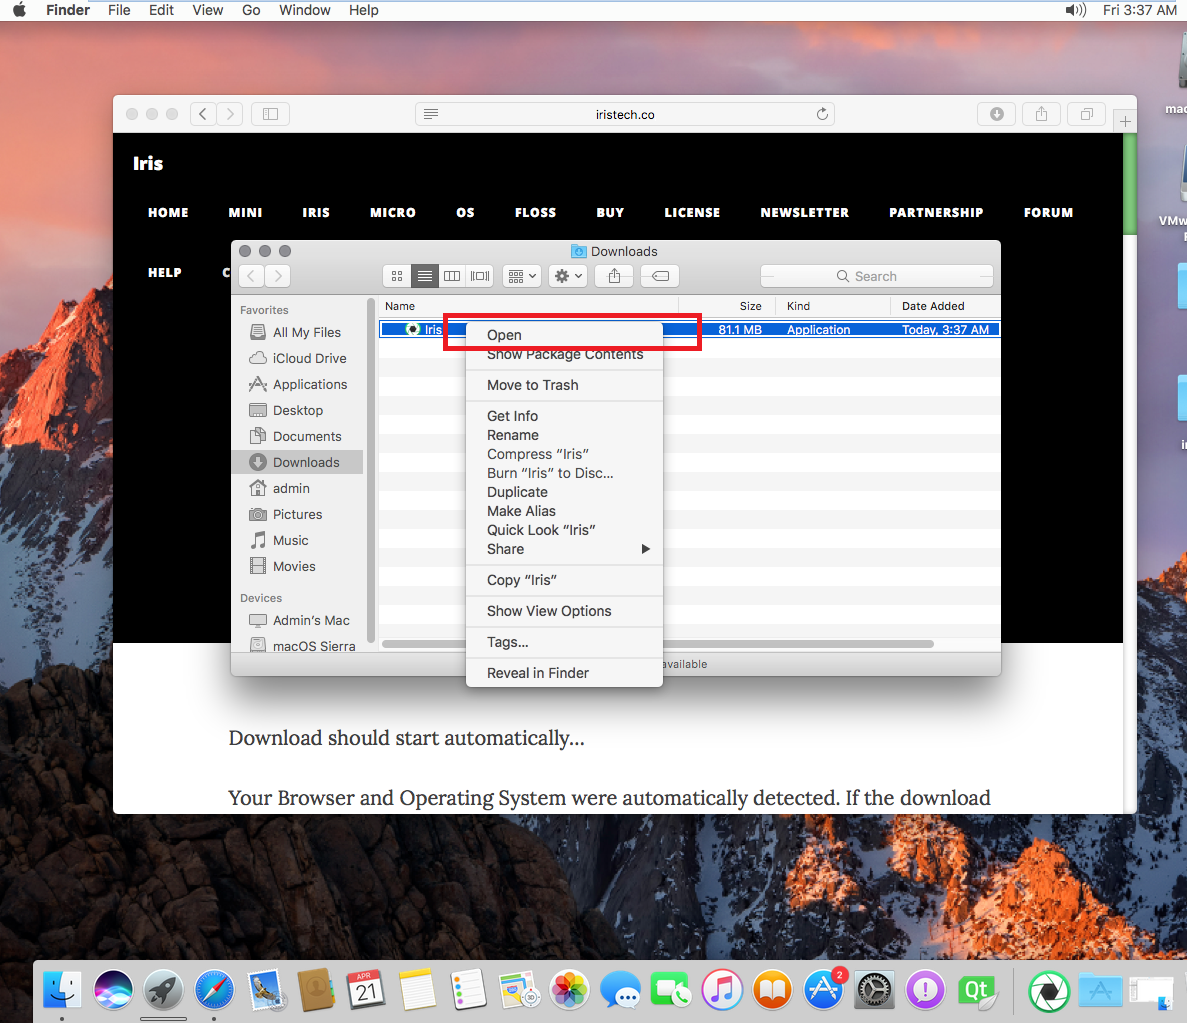 Where To Download Mac Os 10.12